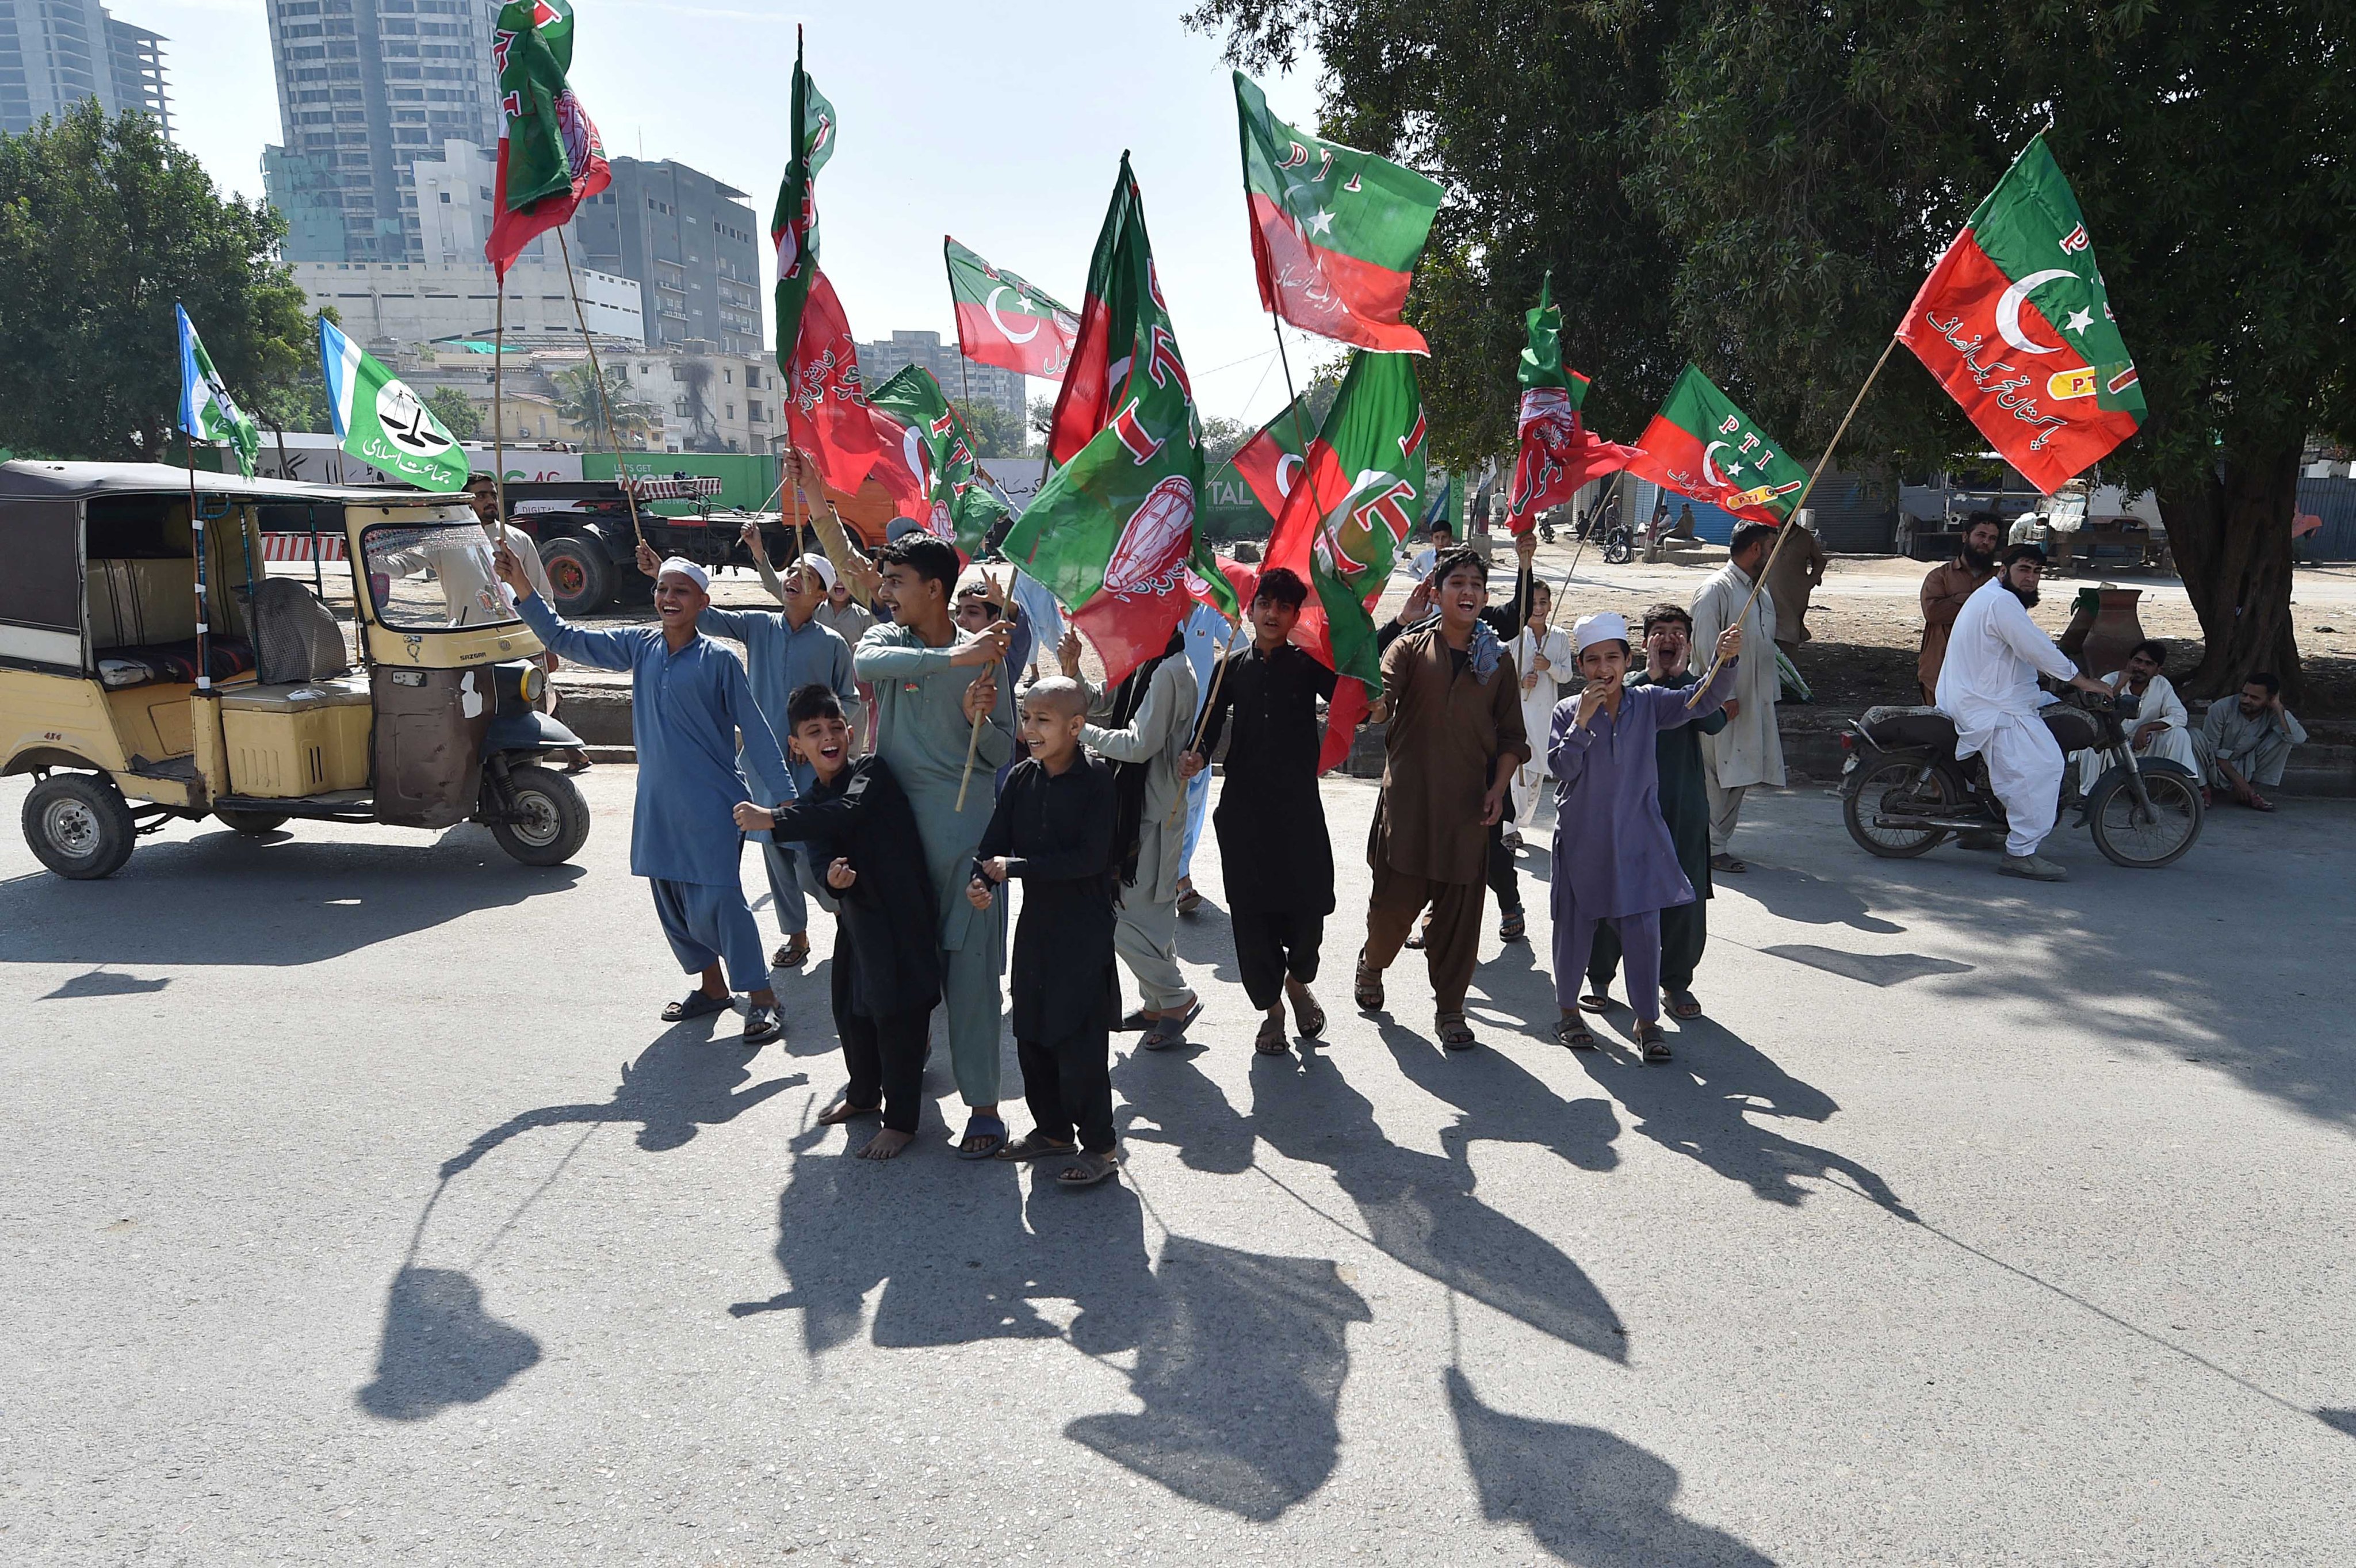 Supporters of convicted former Prime Minister Imran Khan’s Pakistan Tehrik-e-Insaf (PTI) party hold party flags during general elections in Karachi, Pakistan: Photo: EPA-EFE